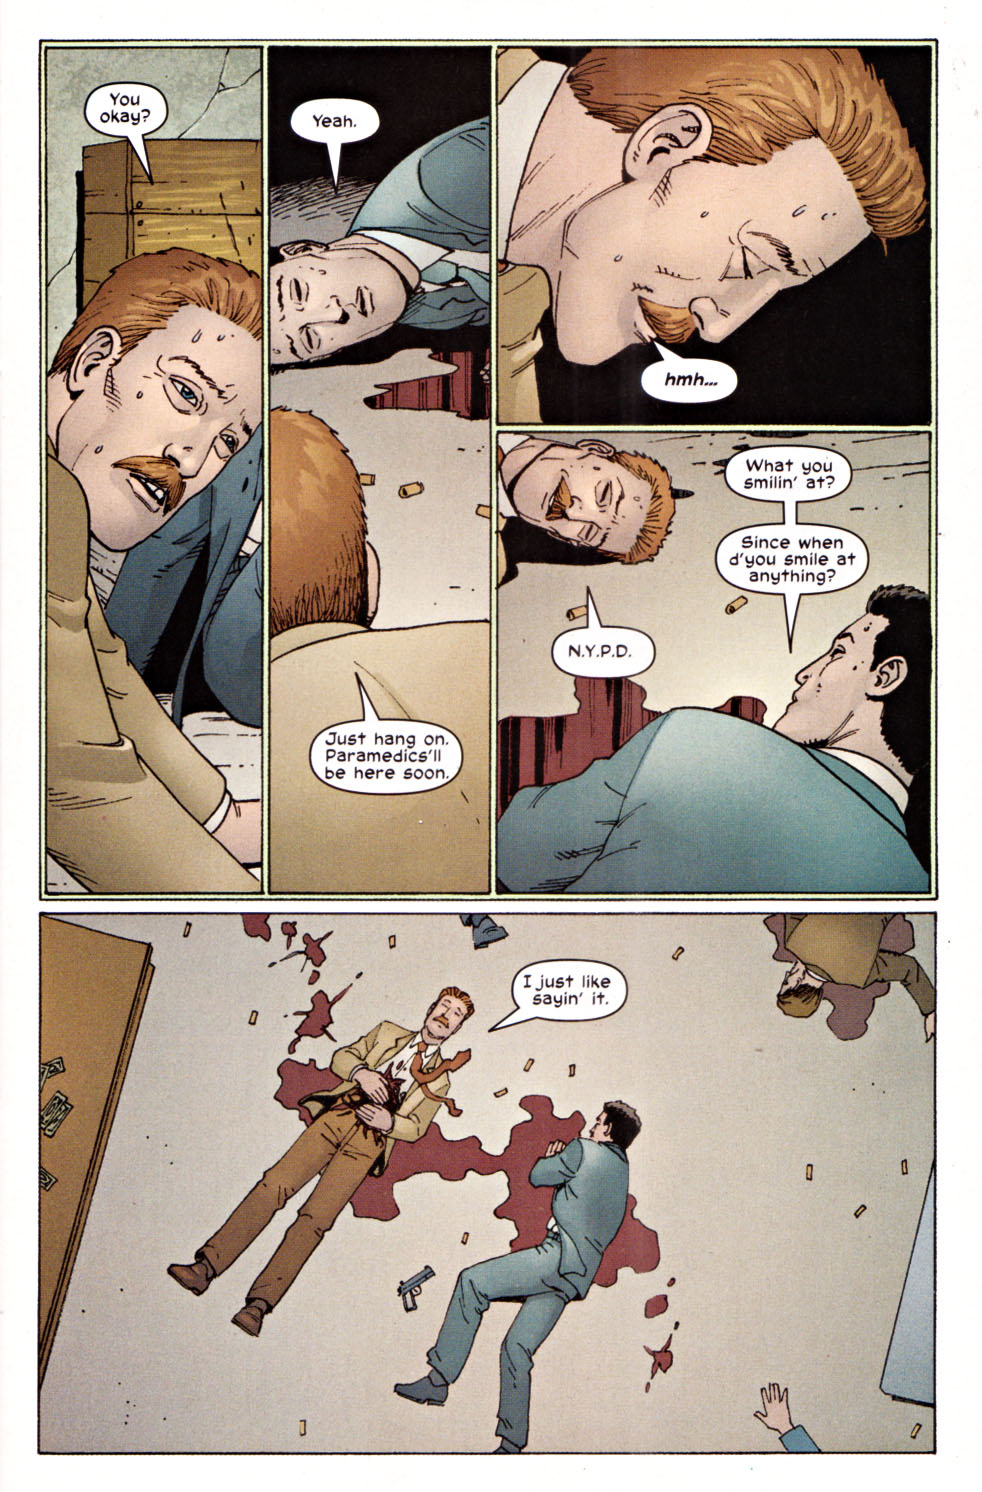 The Punisher (2001) issue 22 - Brotherhood #03 - Page 20